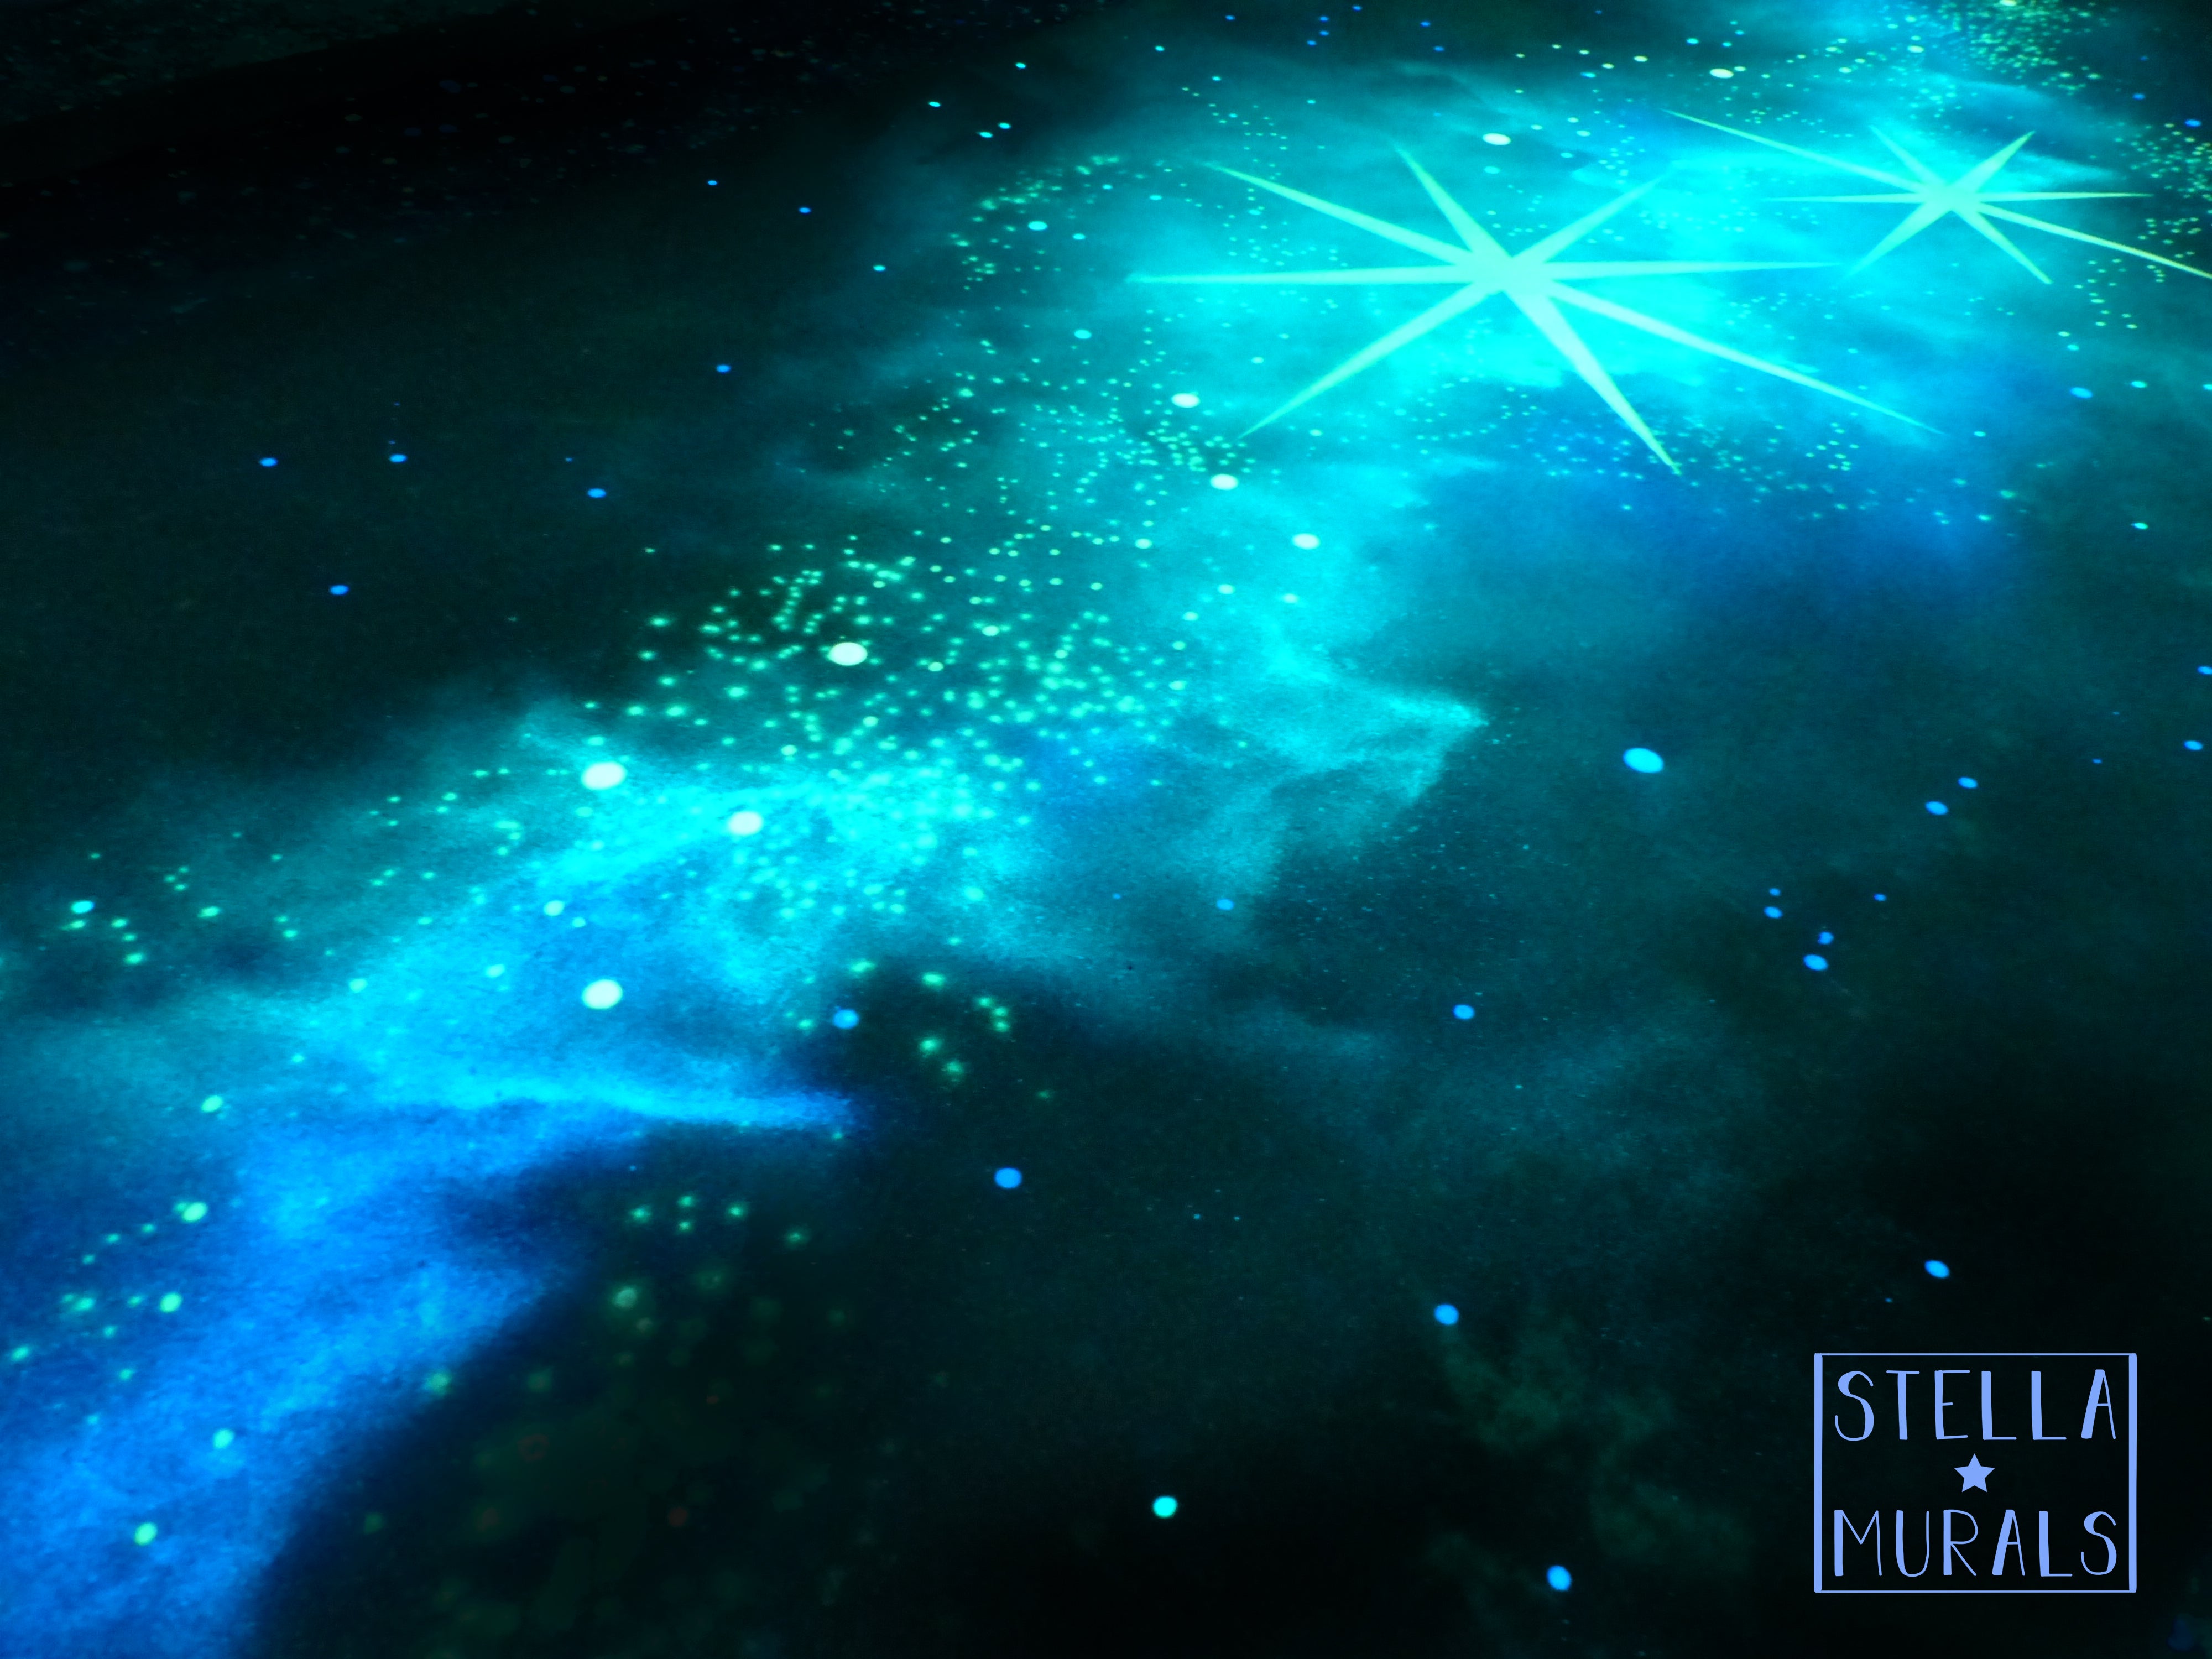 Glow in the dark nebula painted with stars in aqua and blue colours on a peel and stick decal for walls.